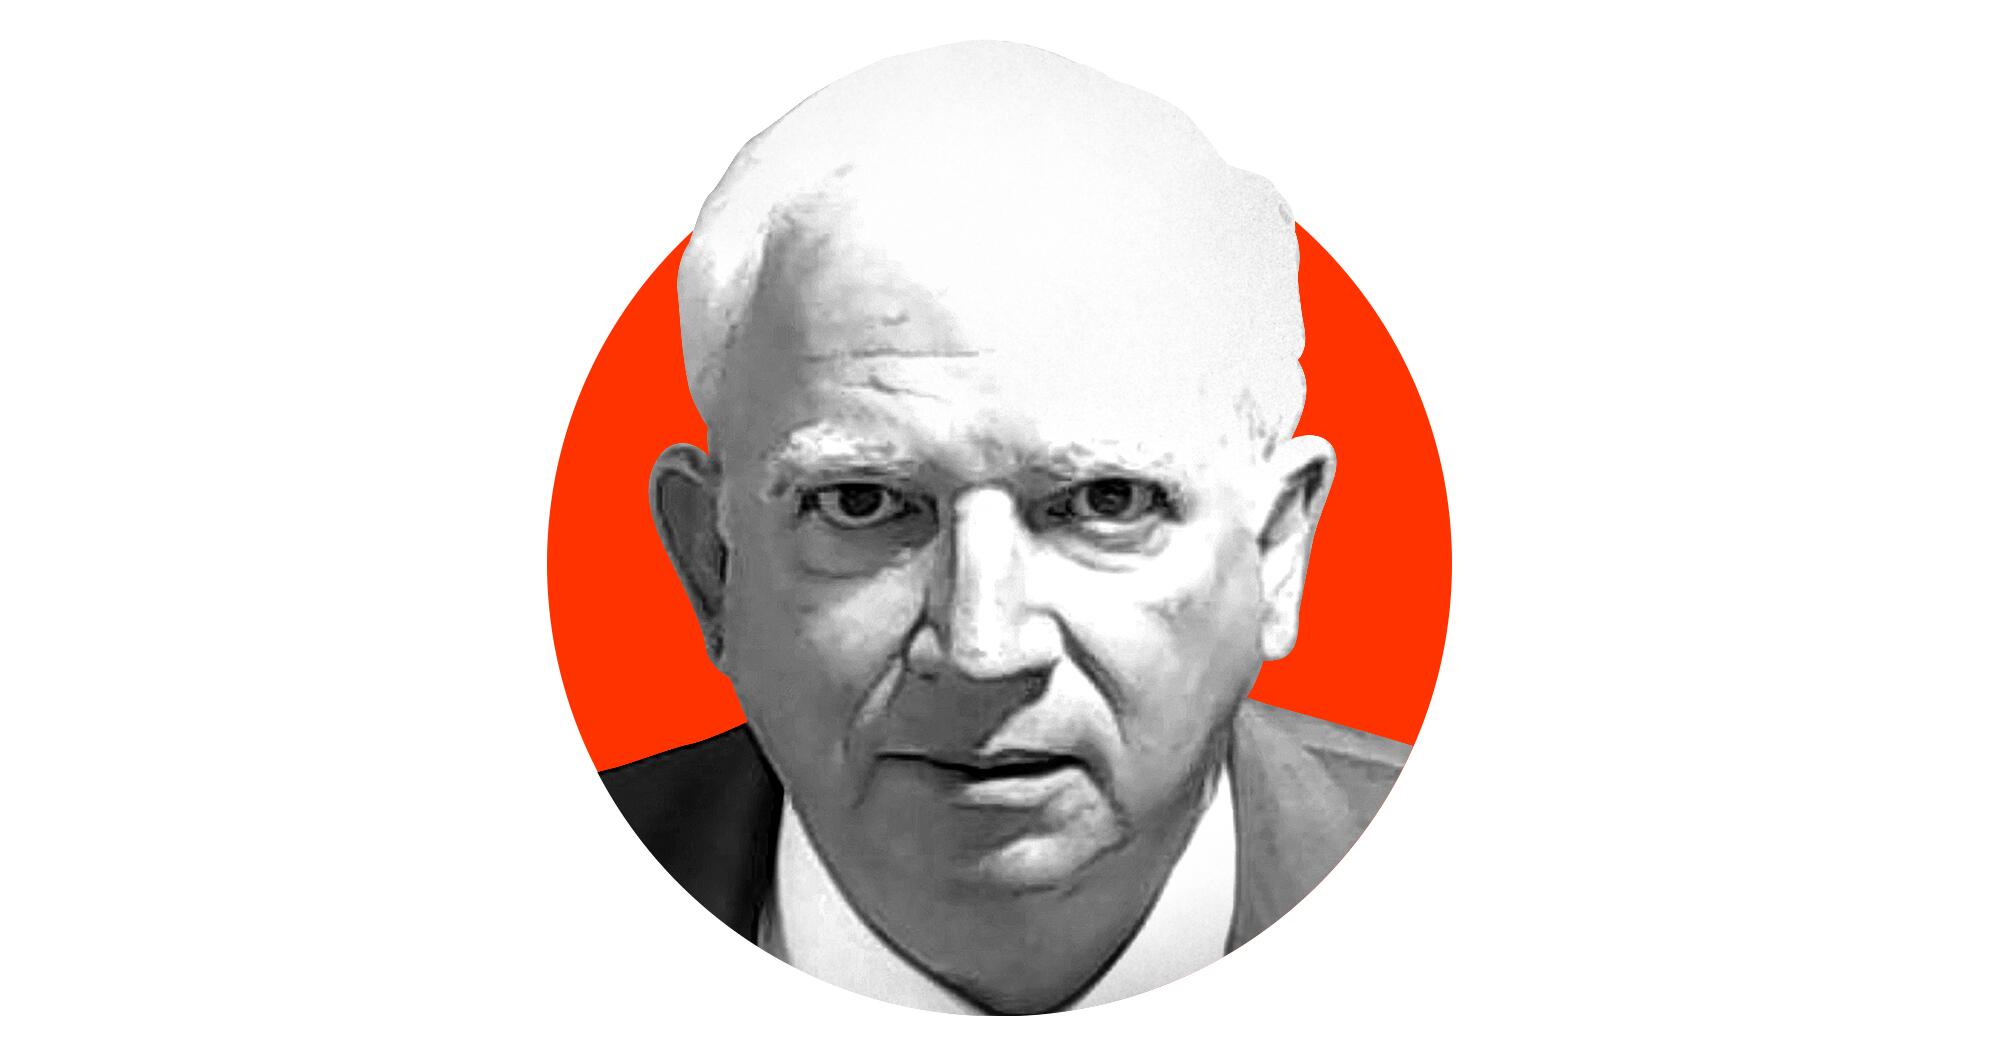 A photo illustration of a black-and-white police booking photo of lawyer John Eastman emerging from a red circle